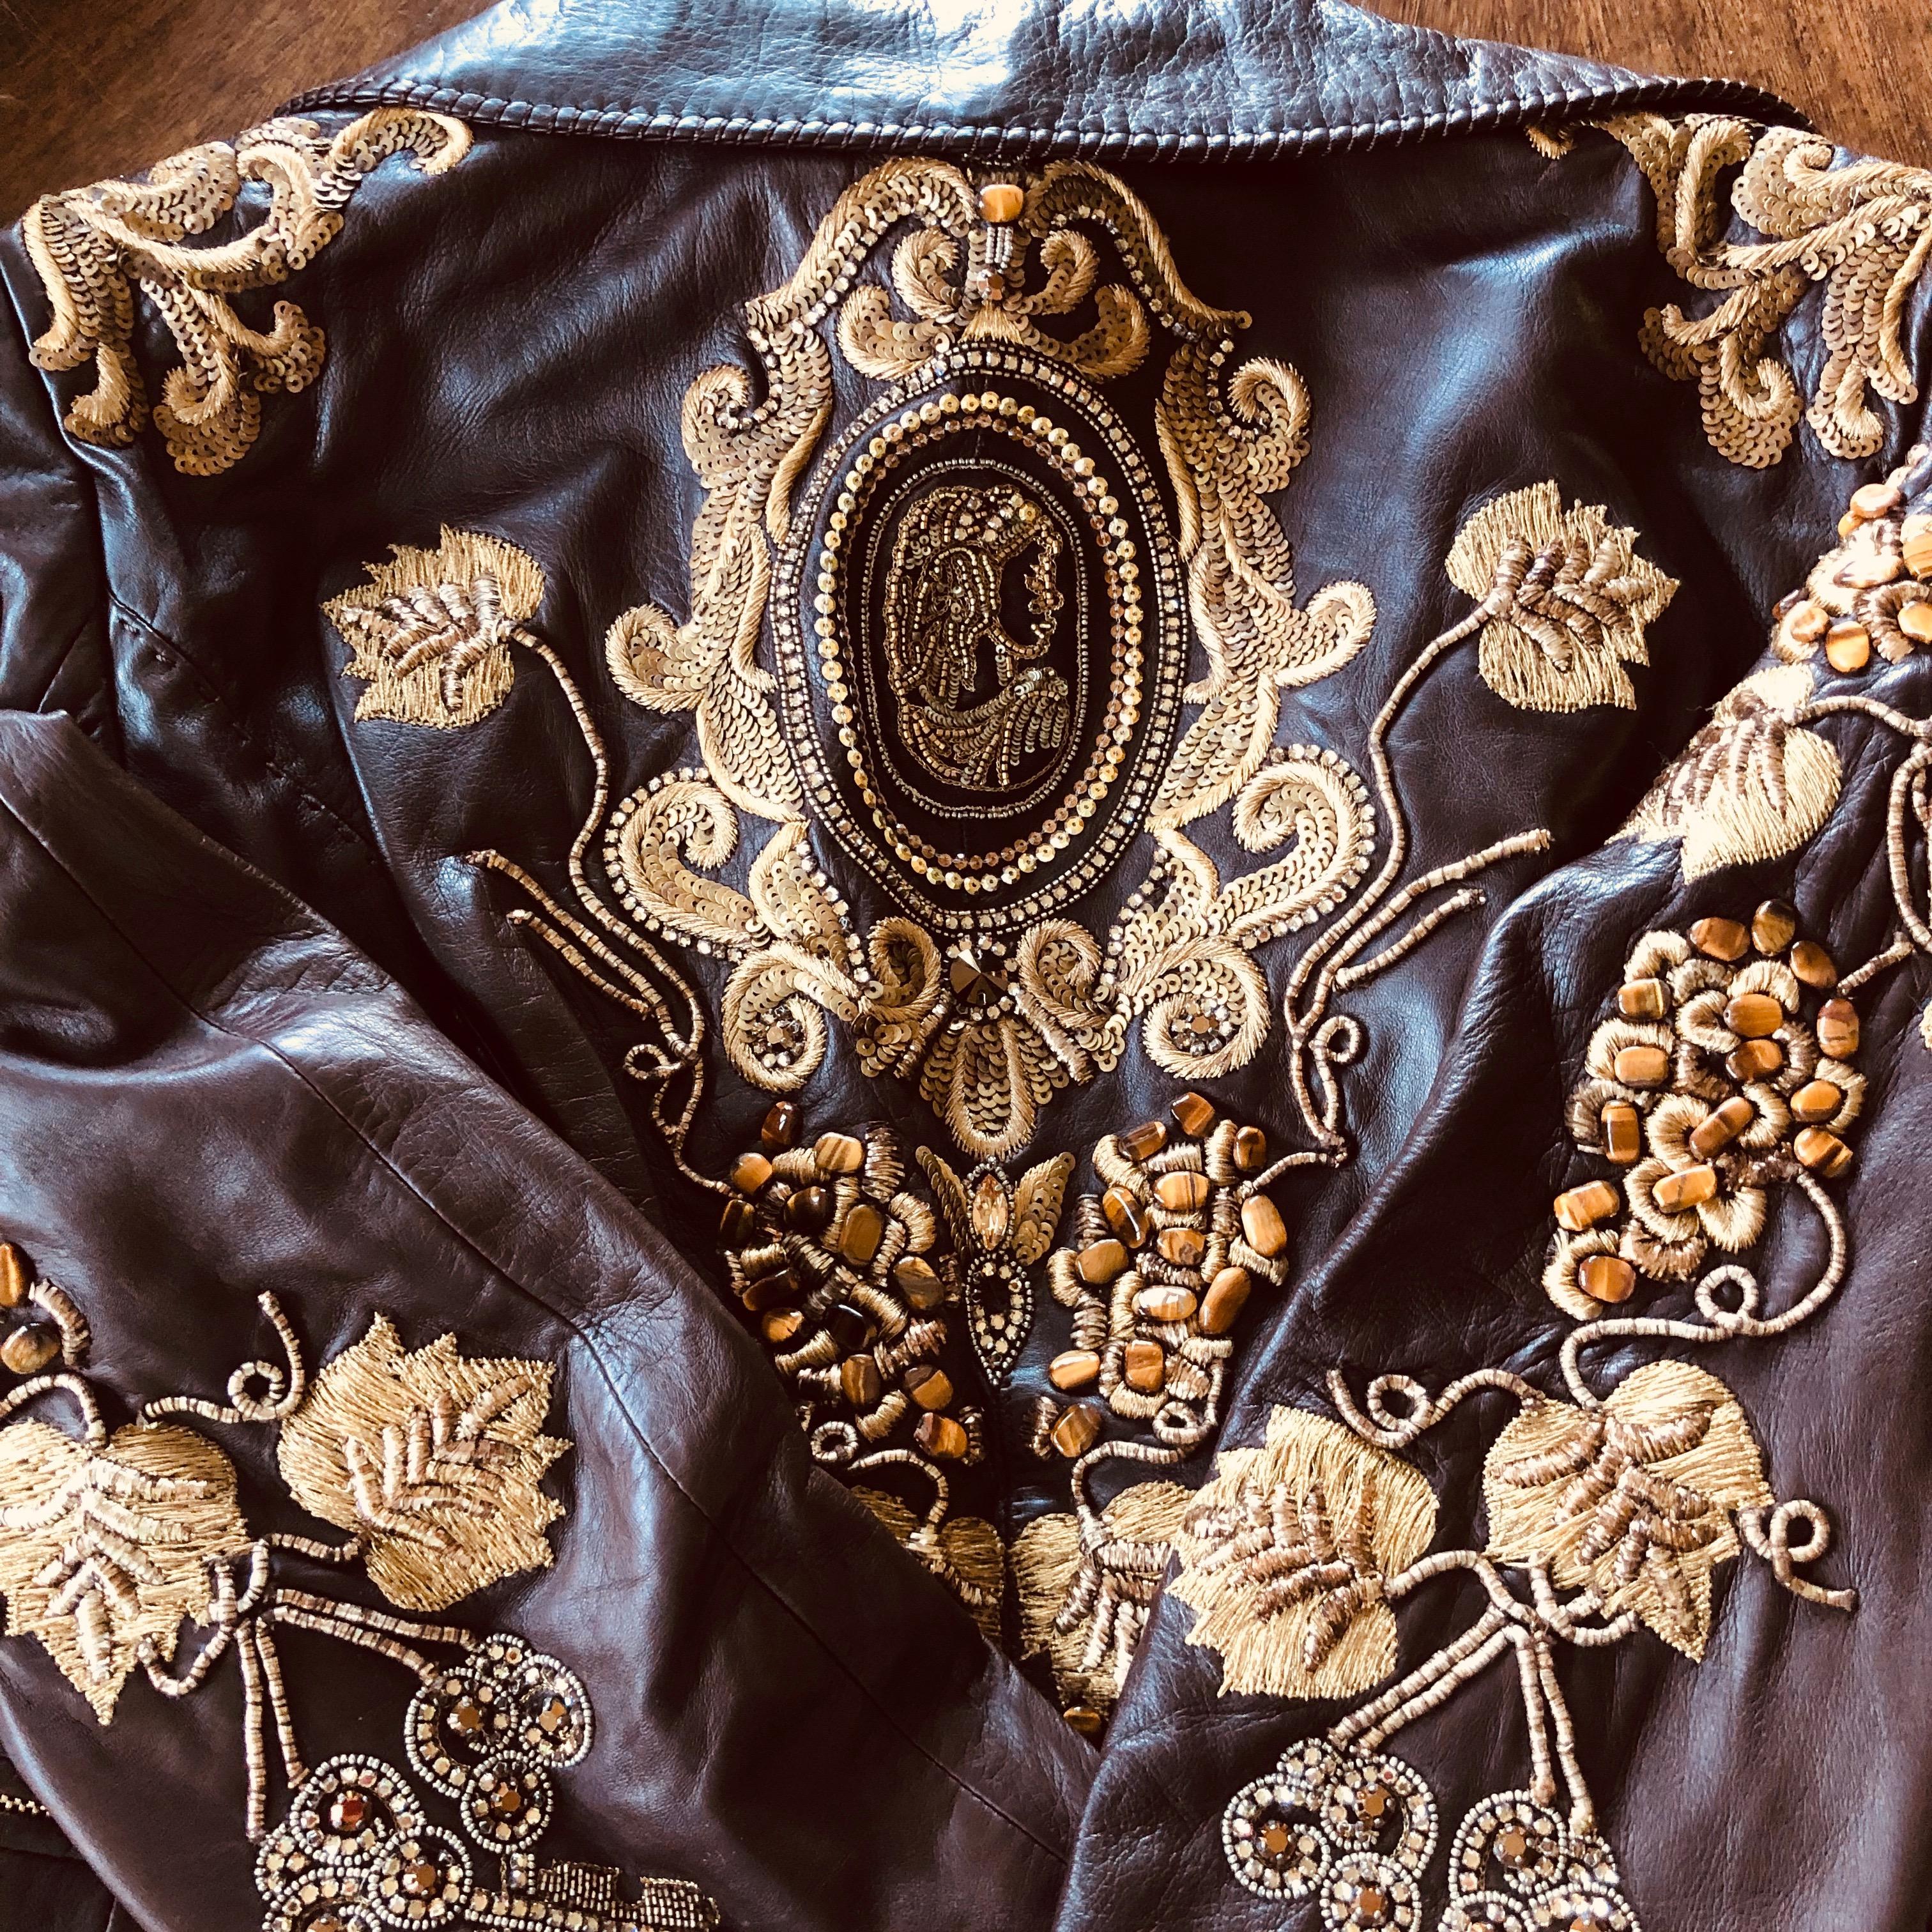 Roberto Cavalli Collectable Embellished Whipstitch Leather Jacket with Tigereye  In Good Condition For Sale In Cloverdale, CA